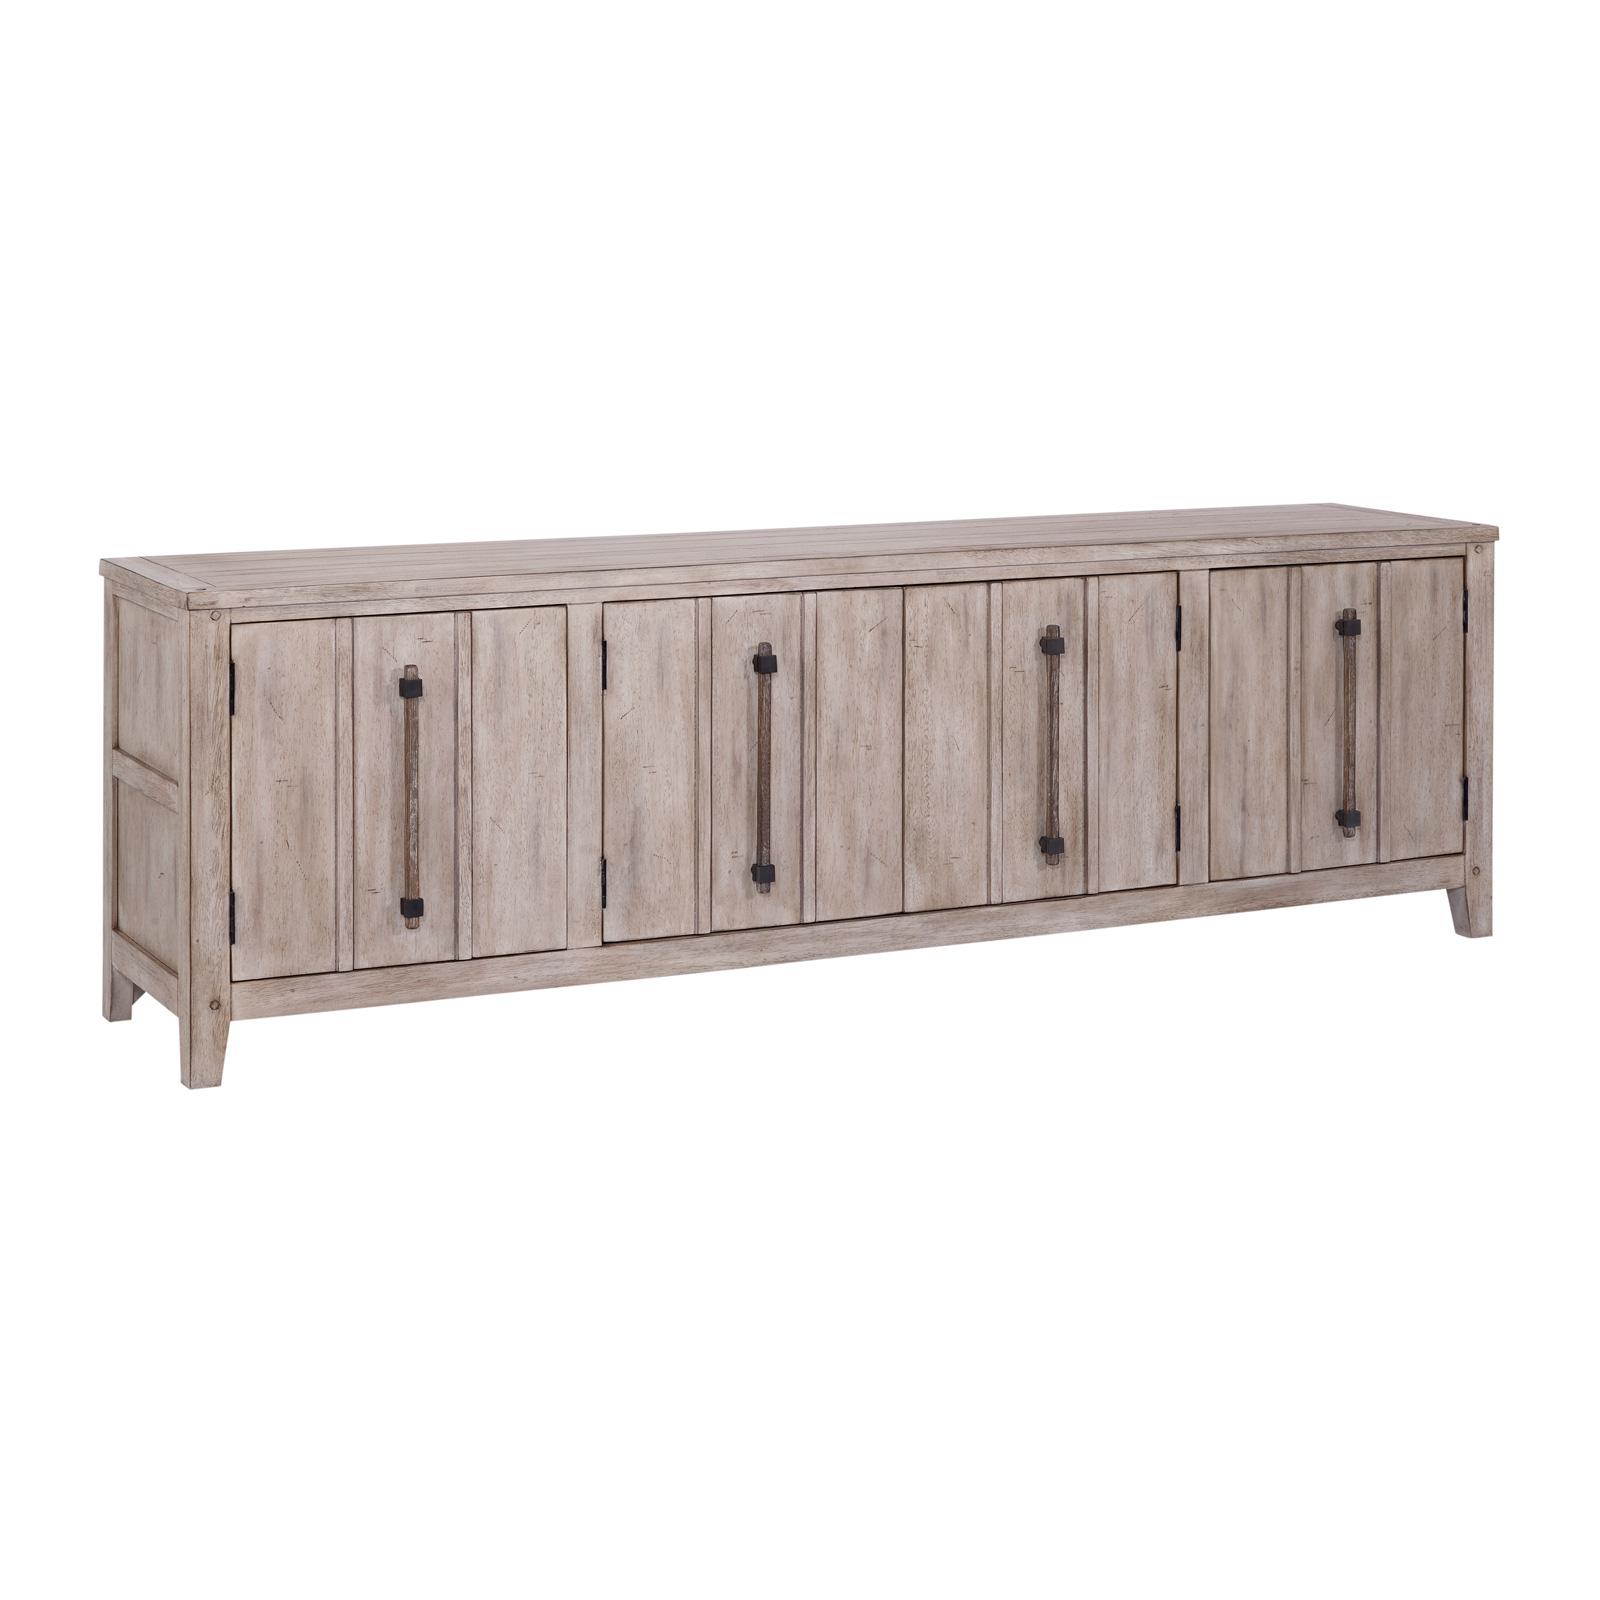 American Woodcrafters AURORA 2810-240 Tv Console